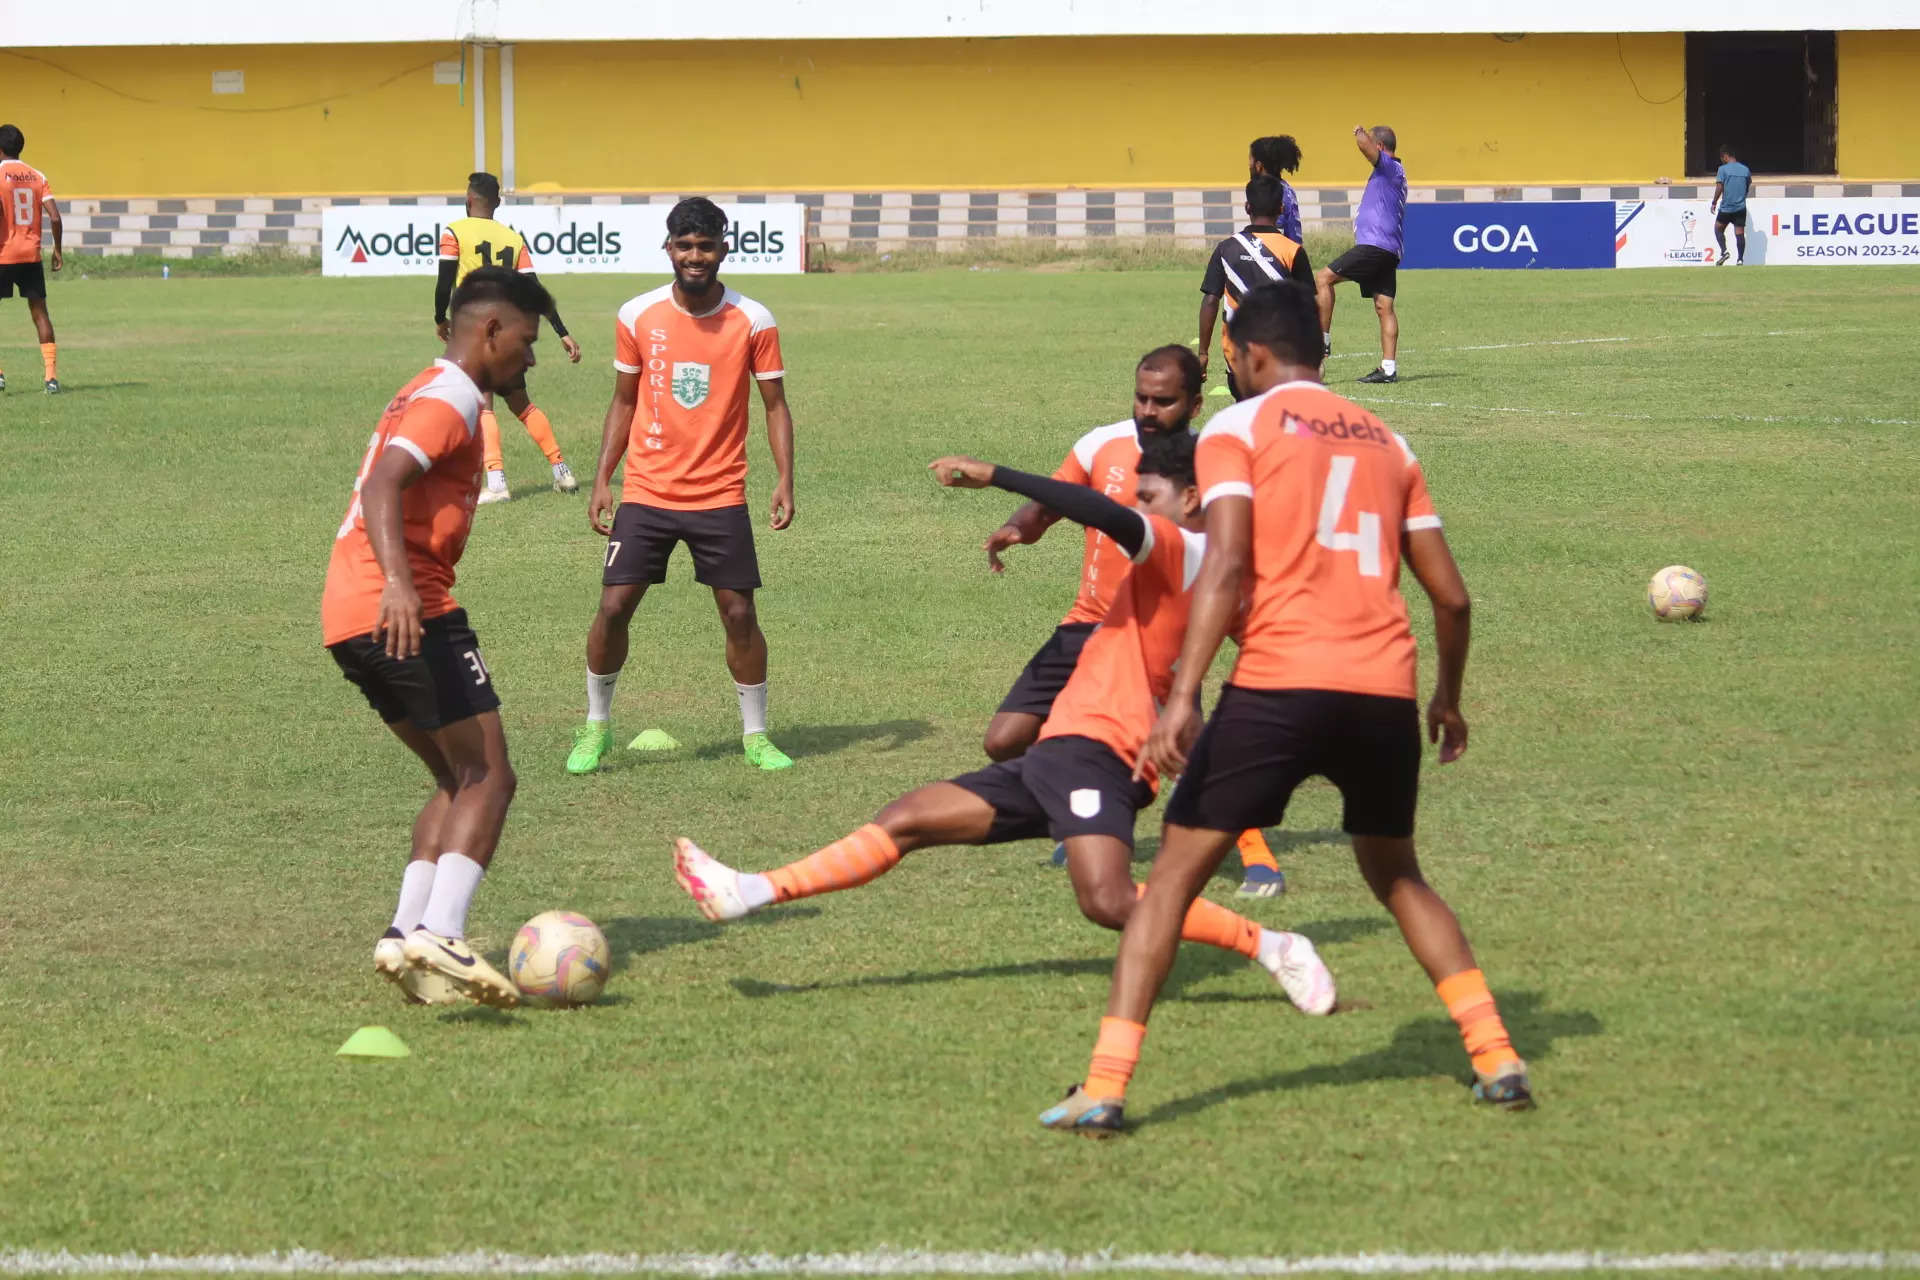 Sporting Clube will have to win their clash against Dempo to stay alive in the race for qualification to the I-League